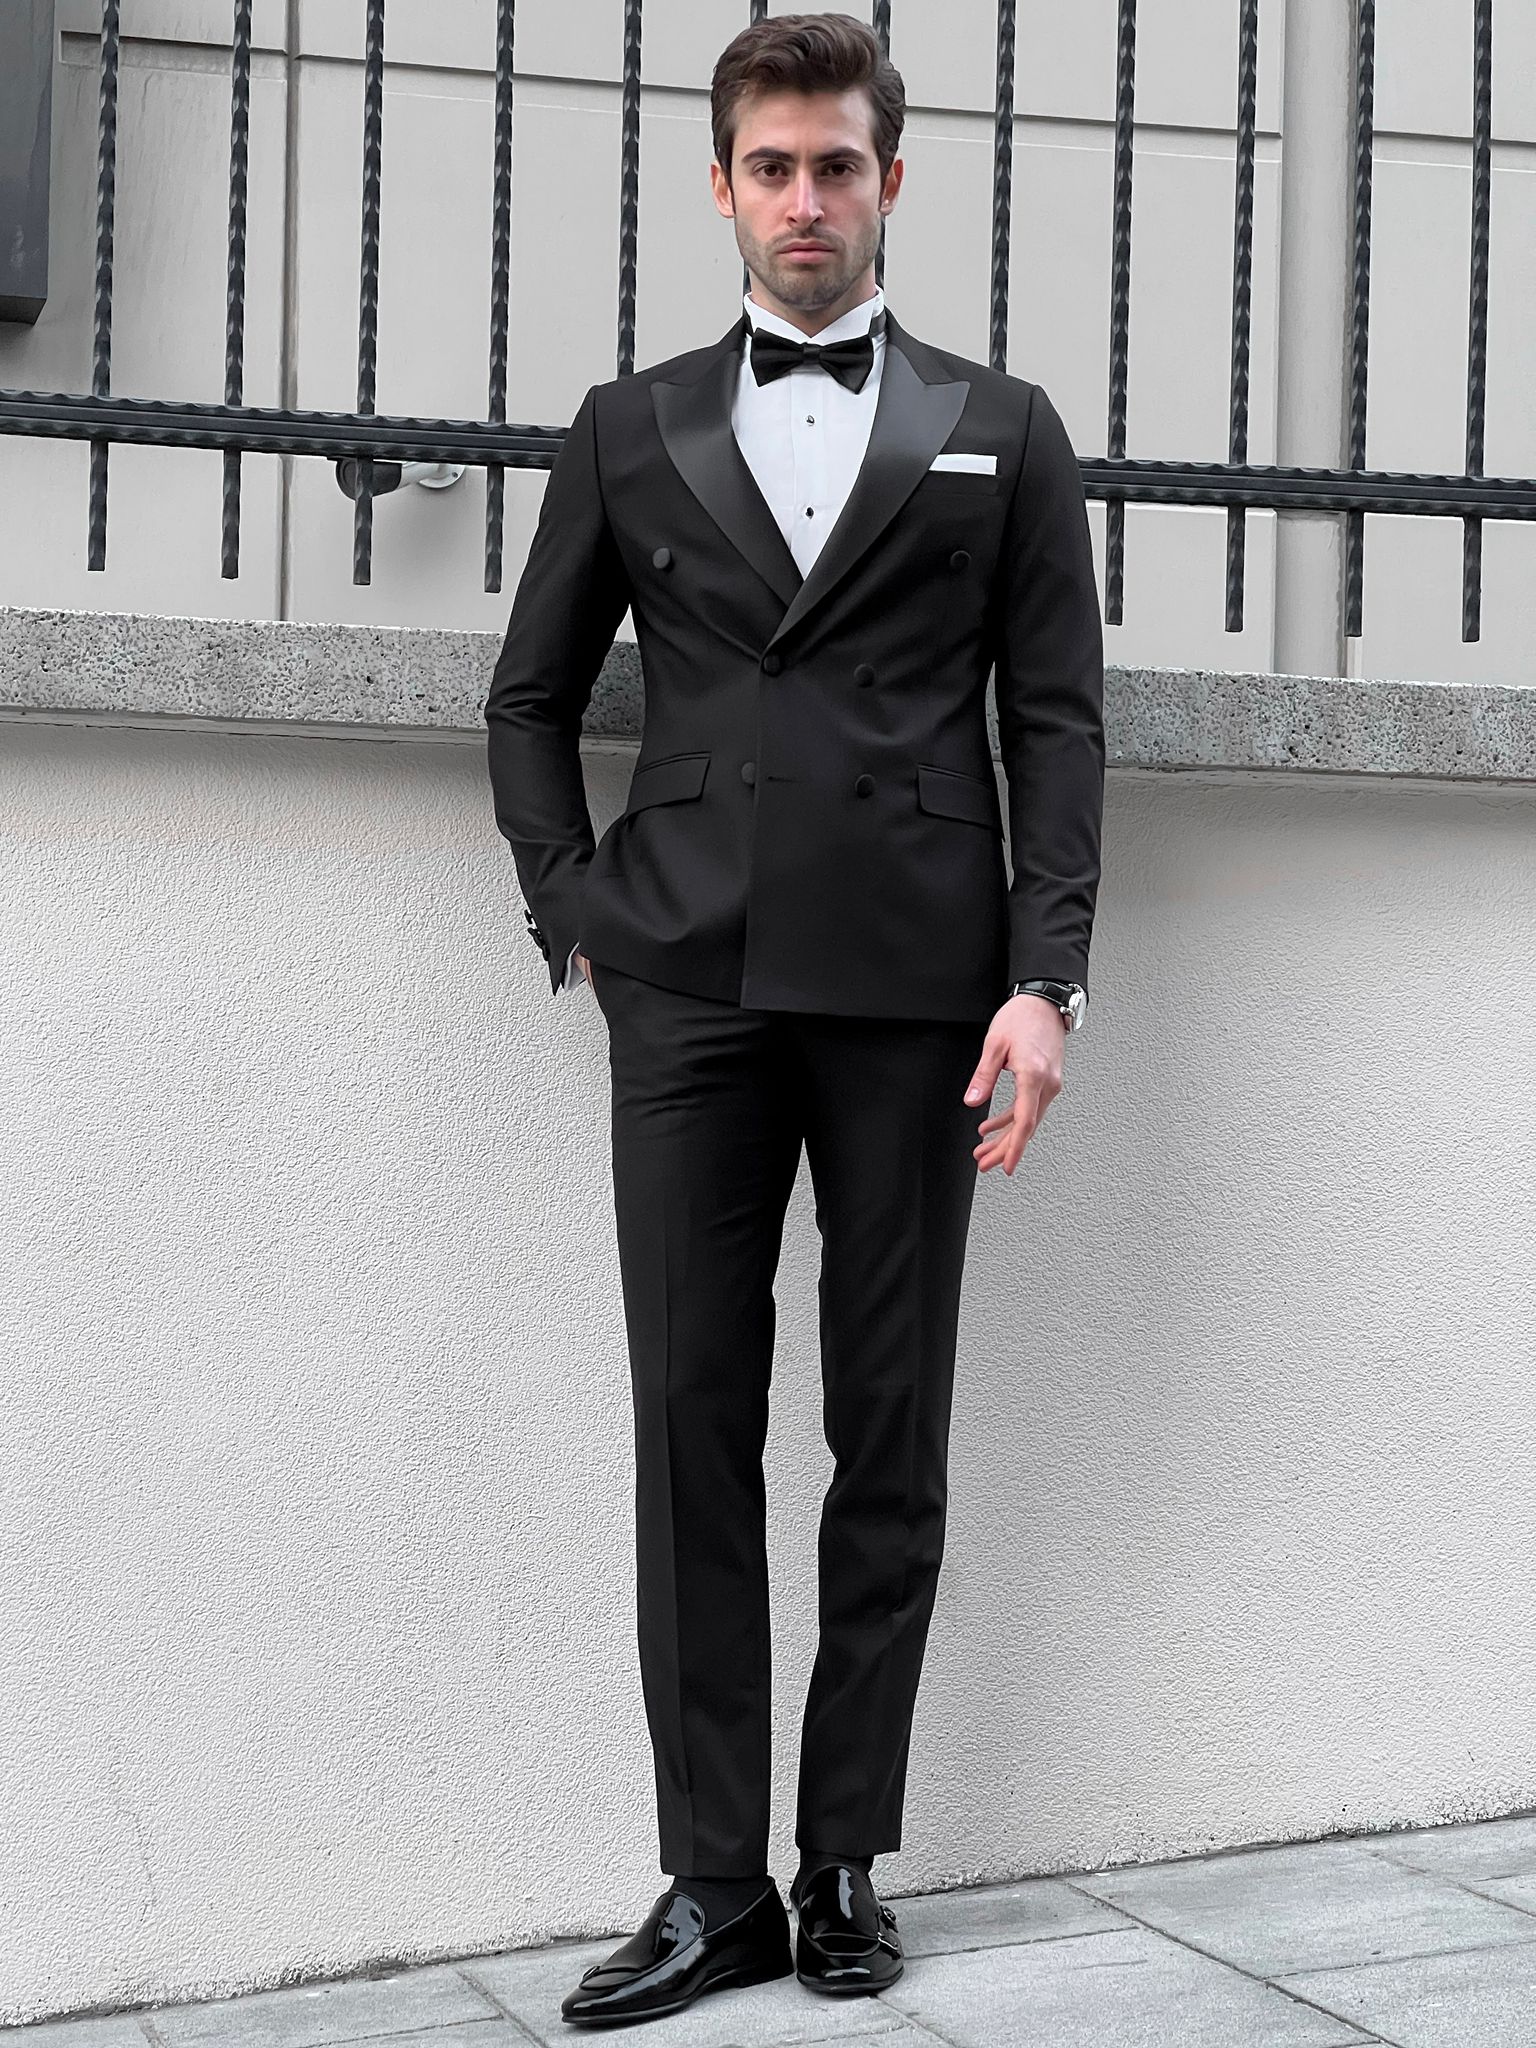 Louis Slim Fit High Quality Pointed Collared Double Breasted Tuxedo (Party Suit/Tuxedo)